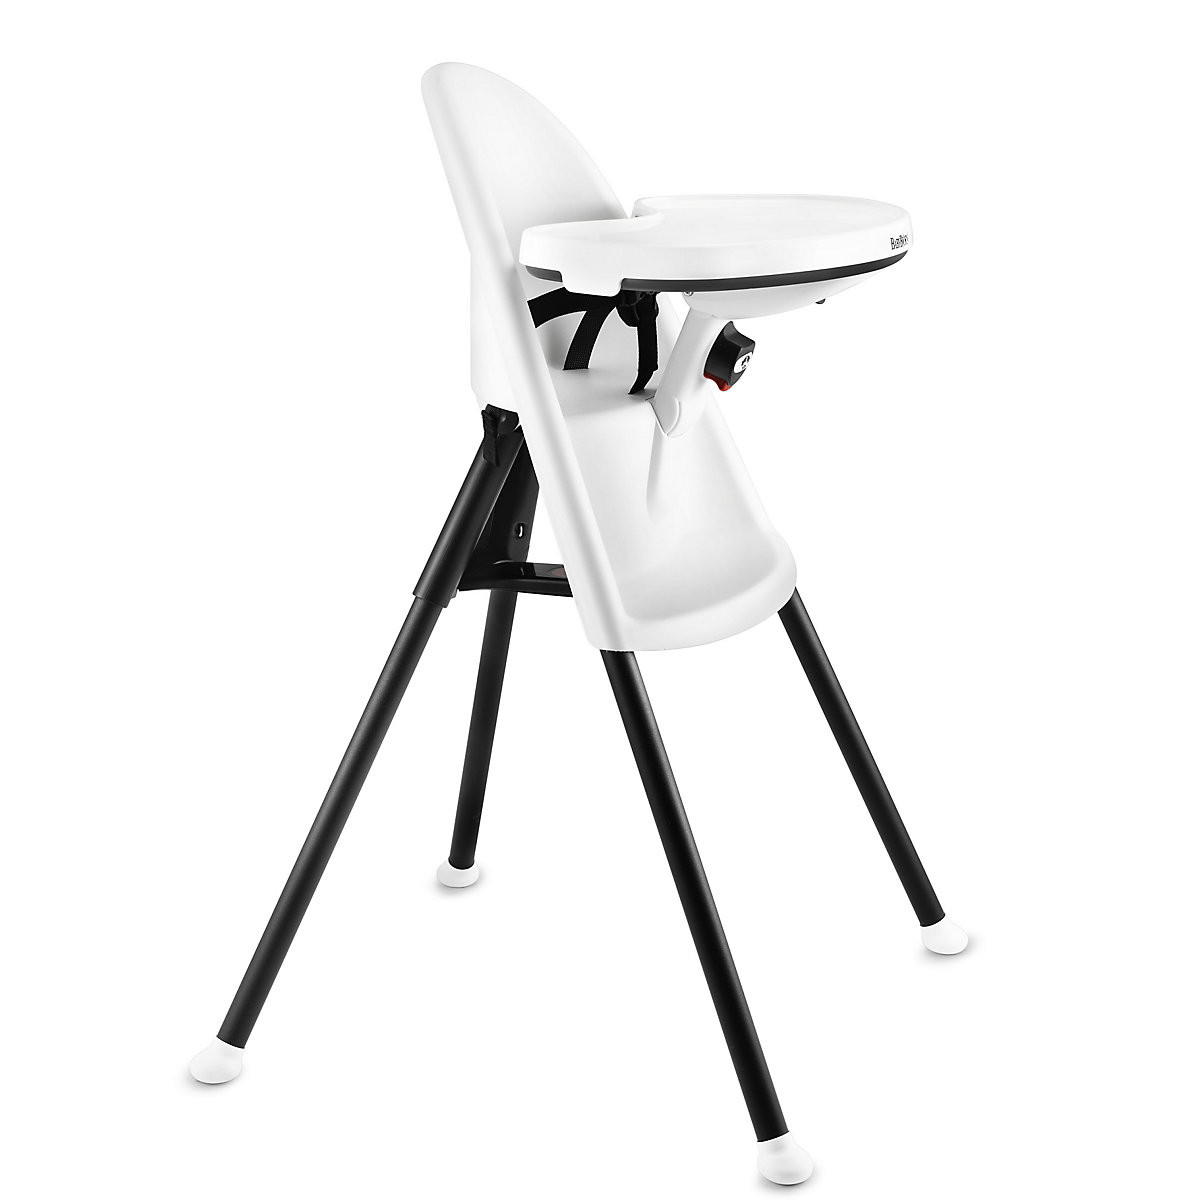 What Happened To Baby Bjorn High Chair?